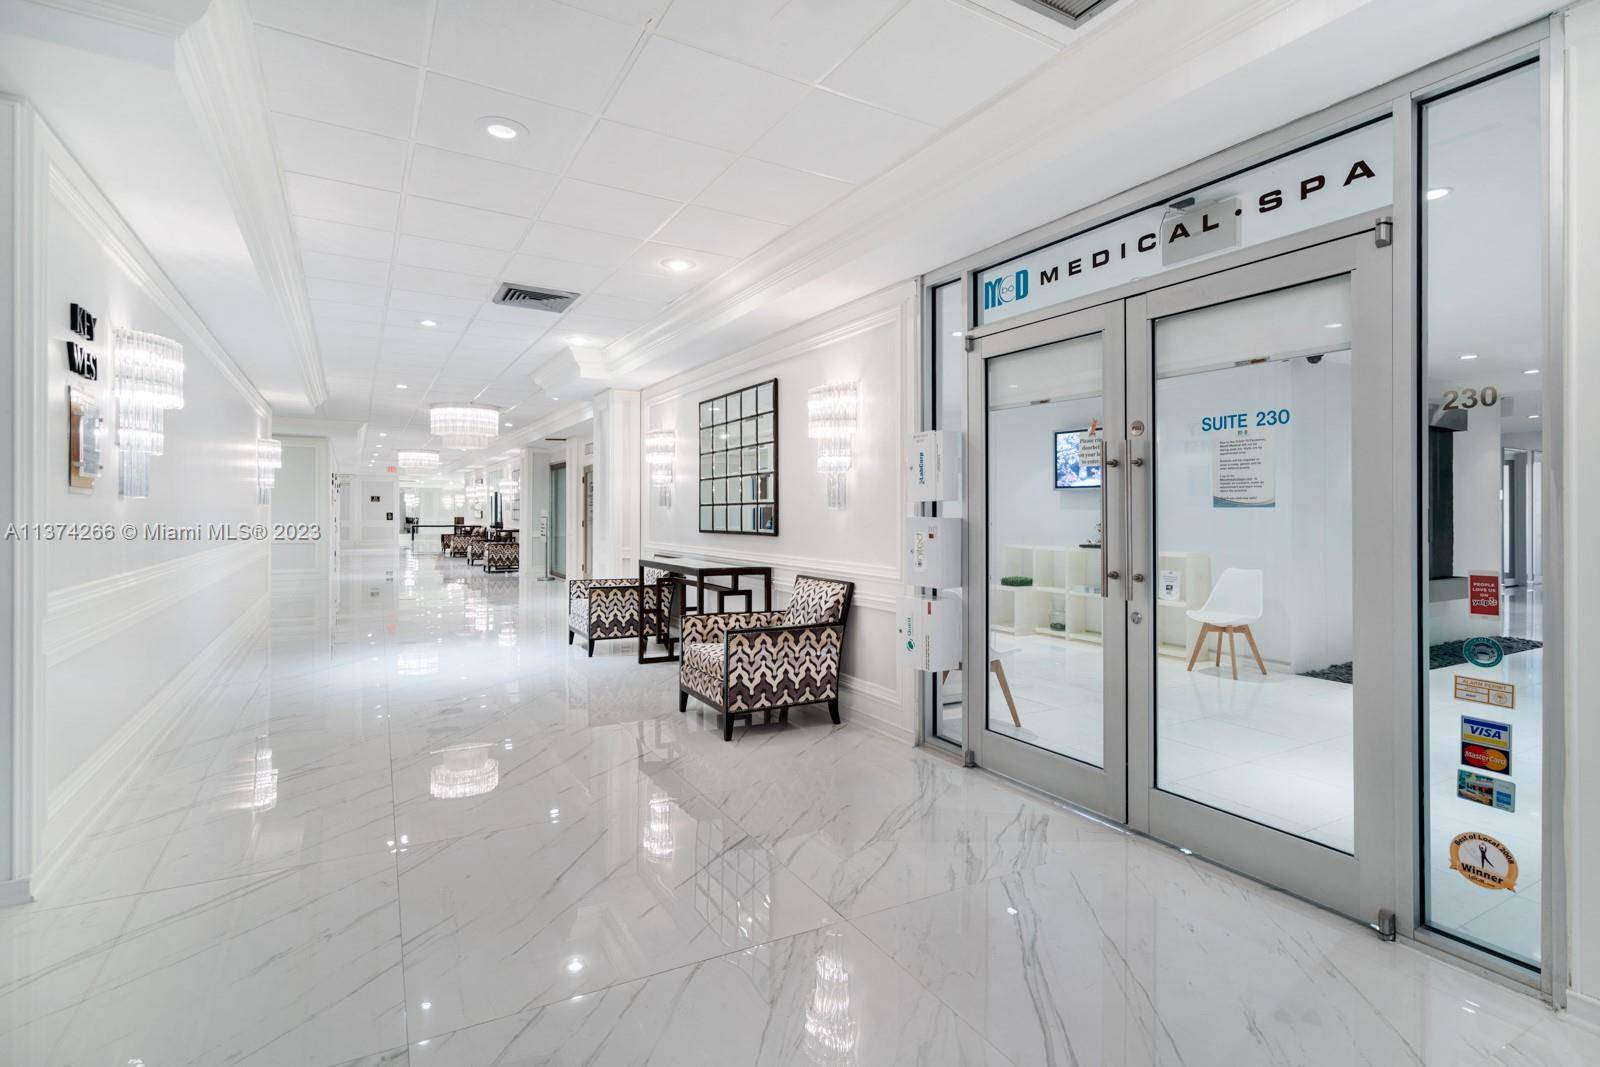 PRIME LOCATION ! Turnkey, fully furnished medical office retail space in Downtown Miami at The Grand.